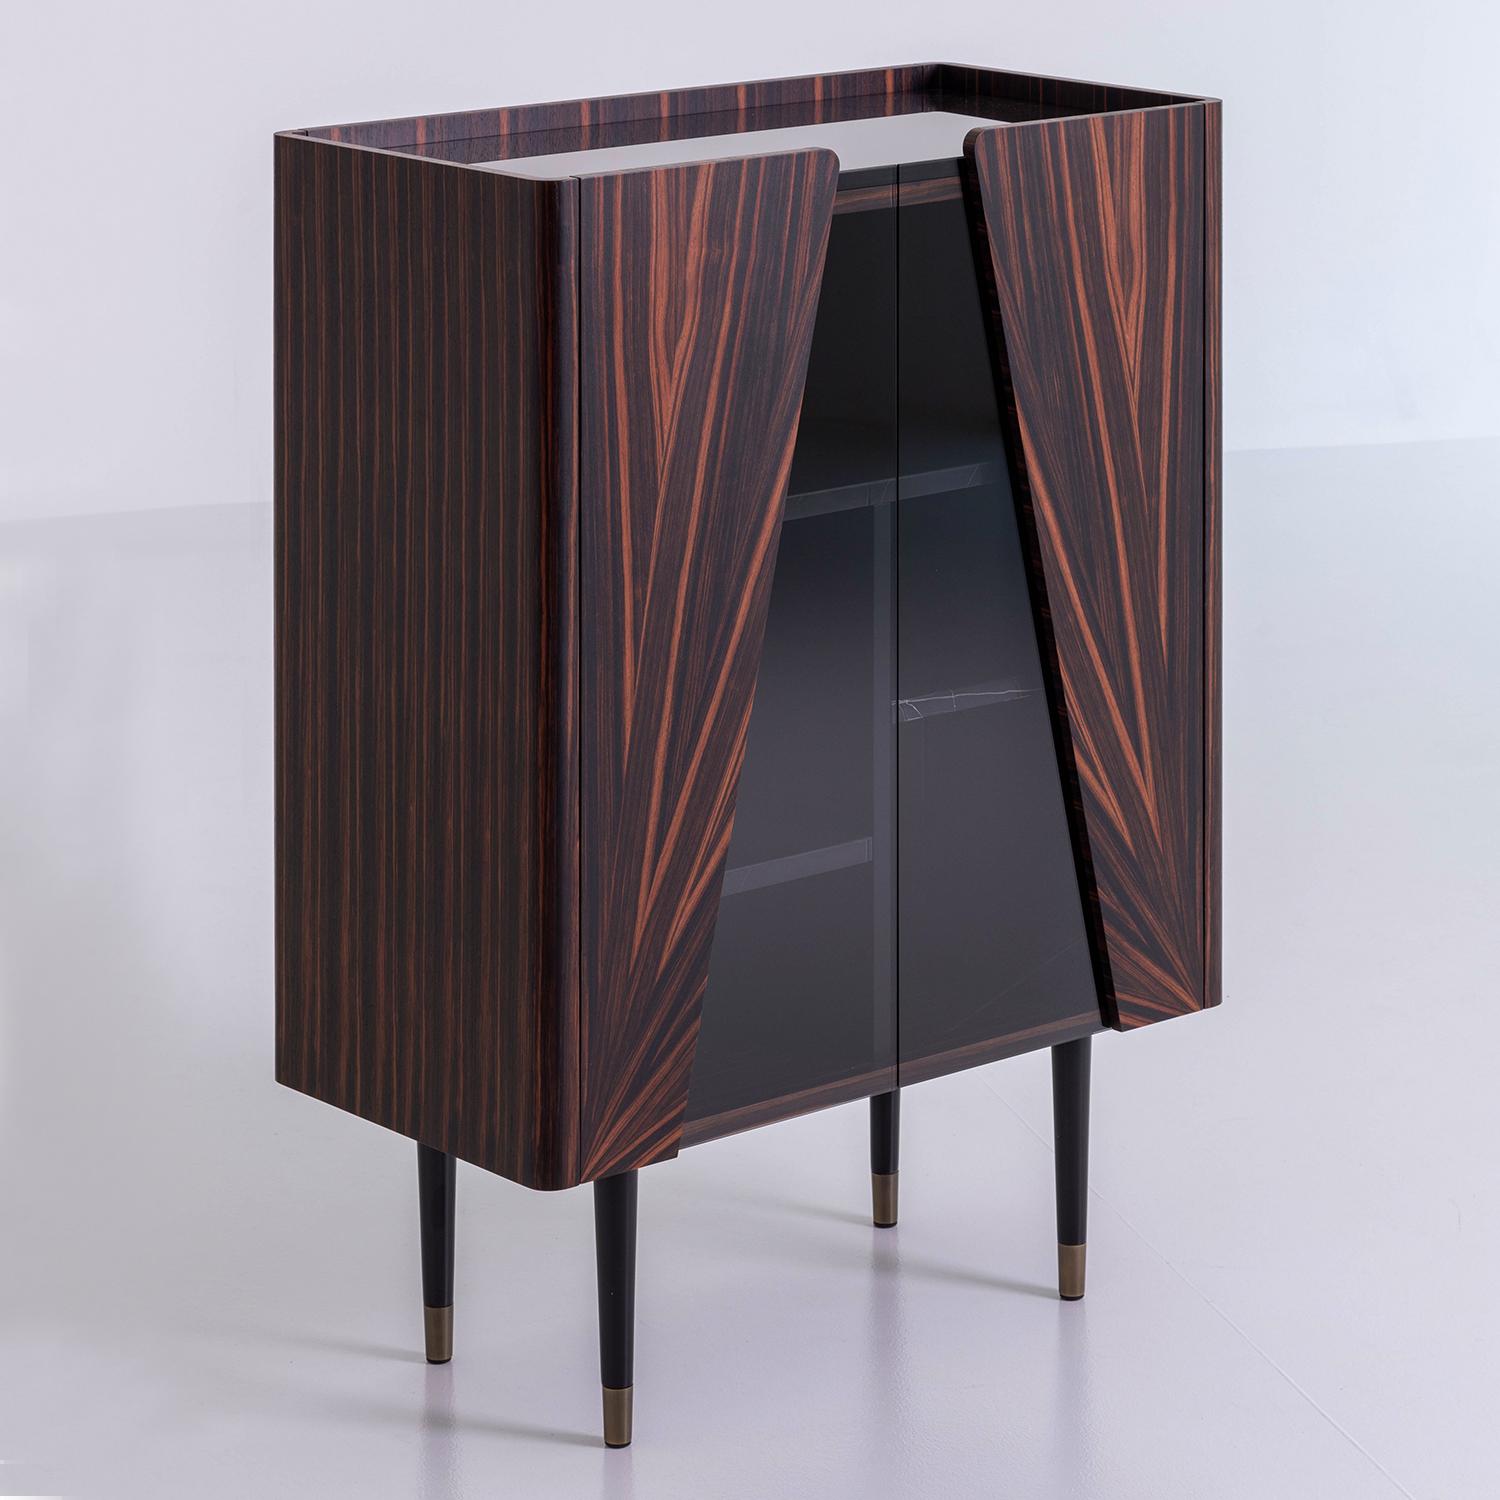 Bar Cabinet Hortz with structure in Ebony wood
With 2 doors made of smocked glass and ebony 
Wood. Including 3 shelves in emperador marble, 
Inside in black lacquered finish with led lighting system.
With 4 black finish legs with solid brass